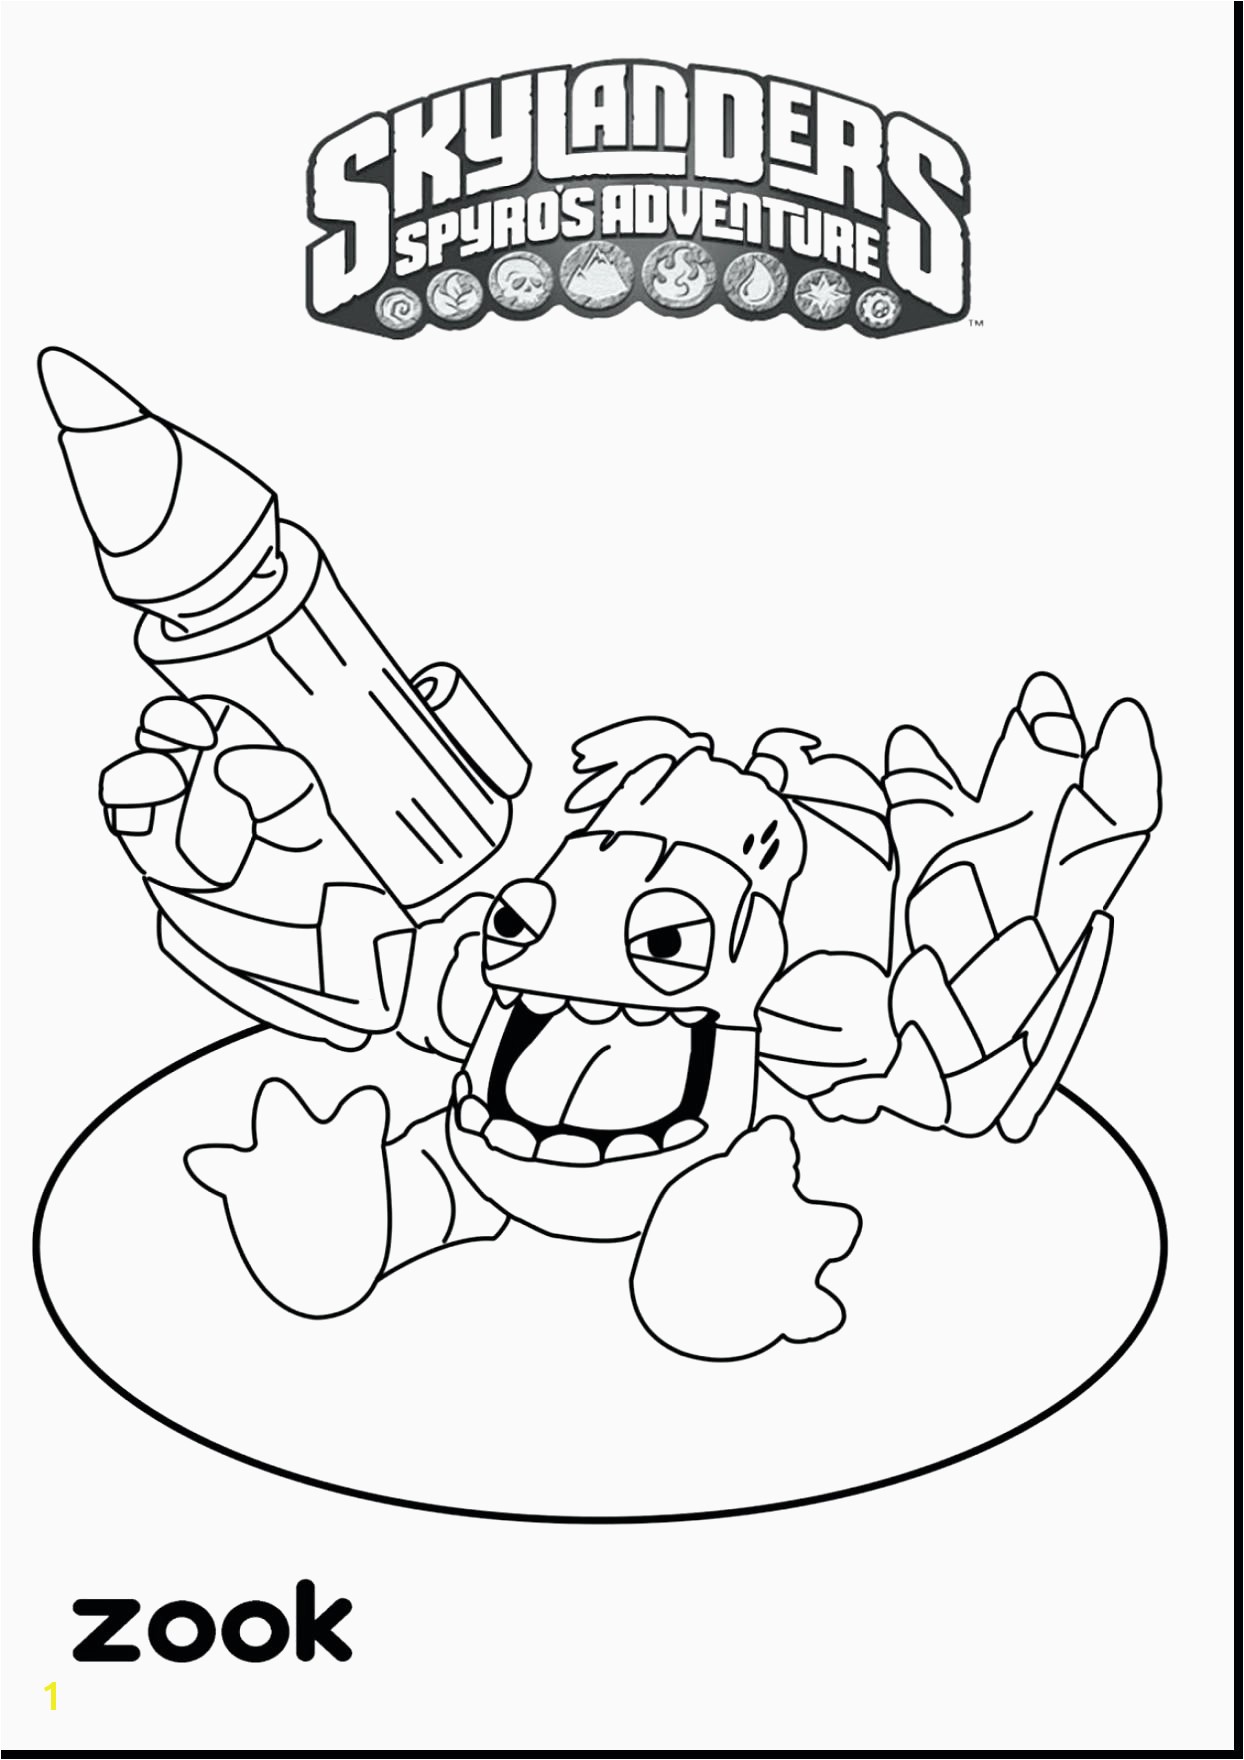 Best Cool Coloring Page Inspirational Witch Coloring Pages New Crayola Awesome Free Printable Coloring